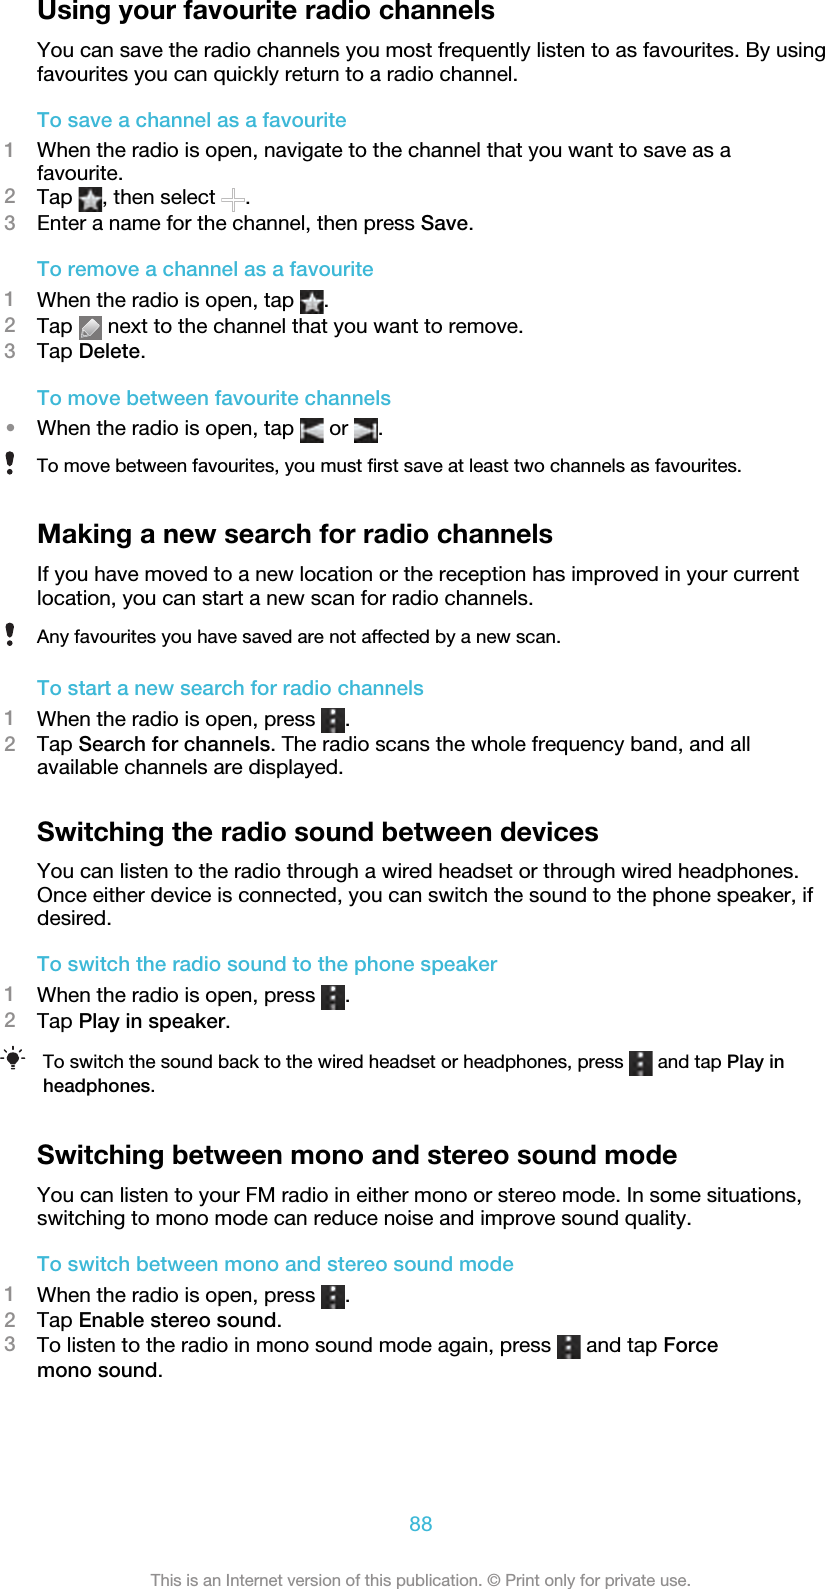 Using your favourite radio channelsYou can save the radio channels you most frequently listen to as favourites. By usingfavourites you can quickly return to a radio channel.To save a channel as a favourite1When the radio is open, navigate to the channel that you want to save as afavourite.2Tap  , then select  .3Enter a name for the channel, then press Save.To remove a channel as a favourite1When the radio is open, tap  .2Tap   next to the channel that you want to remove.3Tap Delete.To move between favourite channels•When the radio is open, tap   or  .To move between favourites, you must first save at least two channels as favourites.Making a new search for radio channelsIf you have moved to a new location or the reception has improved in your currentlocation, you can start a new scan for radio channels.Any favourites you have saved are not affected by a new scan.To start a new search for radio channels1When the radio is open, press  .2Tap Search for channels. The radio scans the whole frequency band, and allavailable channels are displayed.Switching the radio sound between devicesYou can listen to the radio through a wired headset or through wired headphones.Once either device is connected, you can switch the sound to the phone speaker, ifdesired.To switch the radio sound to the phone speaker1When the radio is open, press  .2Tap Play in speaker.To switch the sound back to the wired headset or headphones, press   and tap Play inheadphones.Switching between mono and stereo sound modeYou can listen to your FM radio in either mono or stereo mode. In some situations,switching to mono mode can reduce noise and improve sound quality.To switch between mono and stereo sound mode1When the radio is open, press  .2Tap Enable stereo sound.3To listen to the radio in mono sound mode again, press   and tap Forcemono sound.88This is an Internet version of this publication. © Print only for private use.